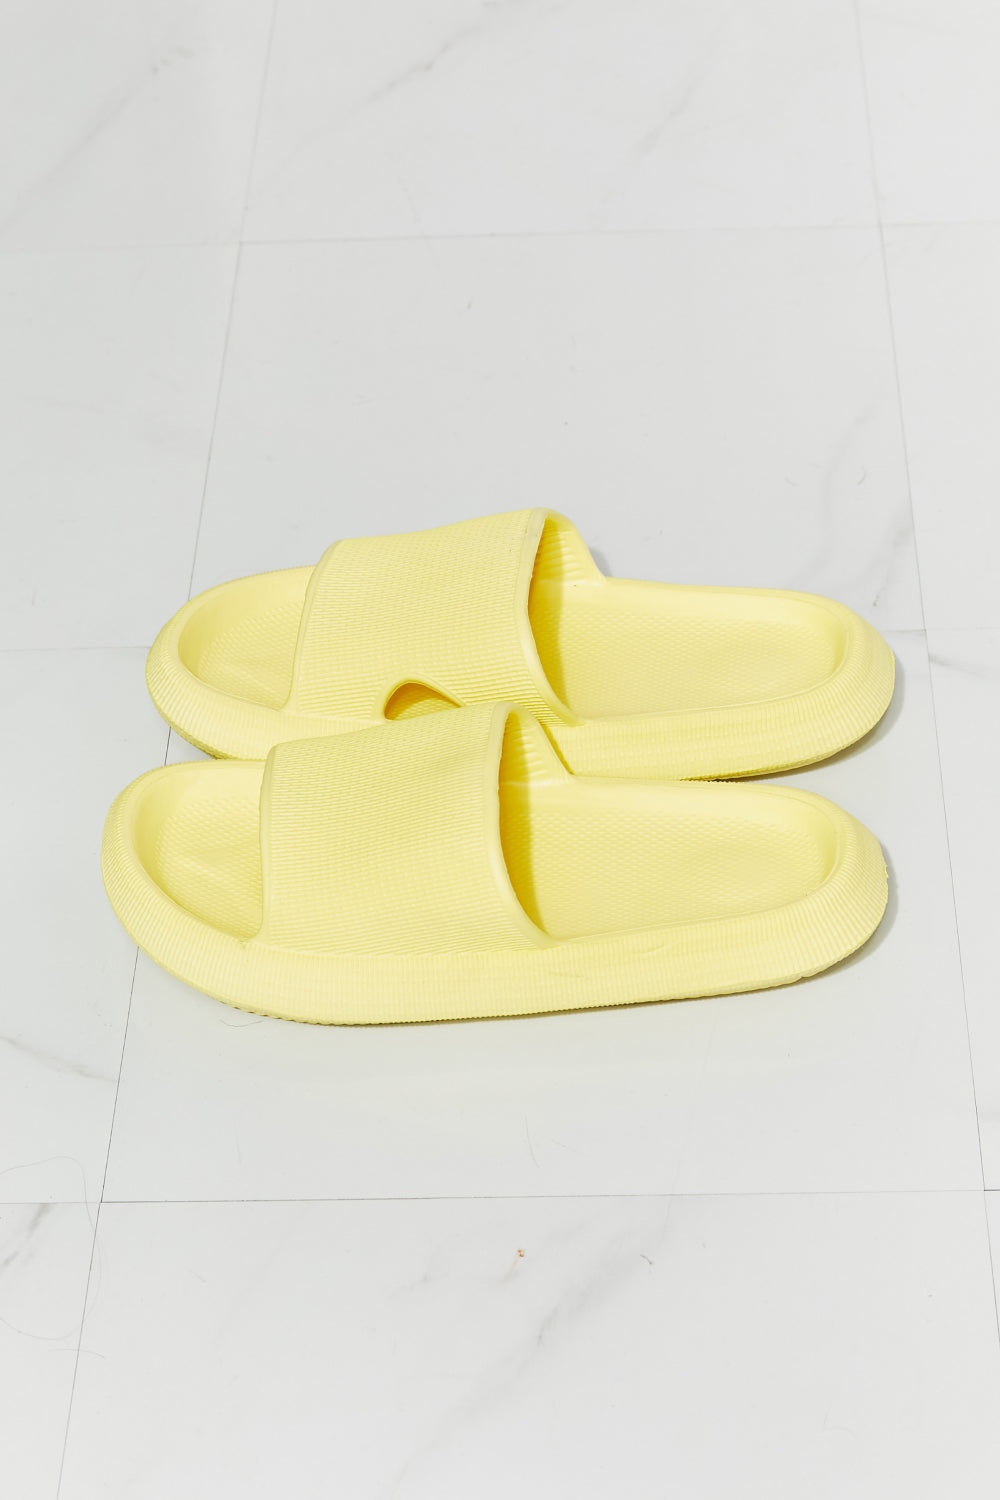 MMShoes Arms Around Me Open Toe Slide in Yellow - Tigbul's Fashion